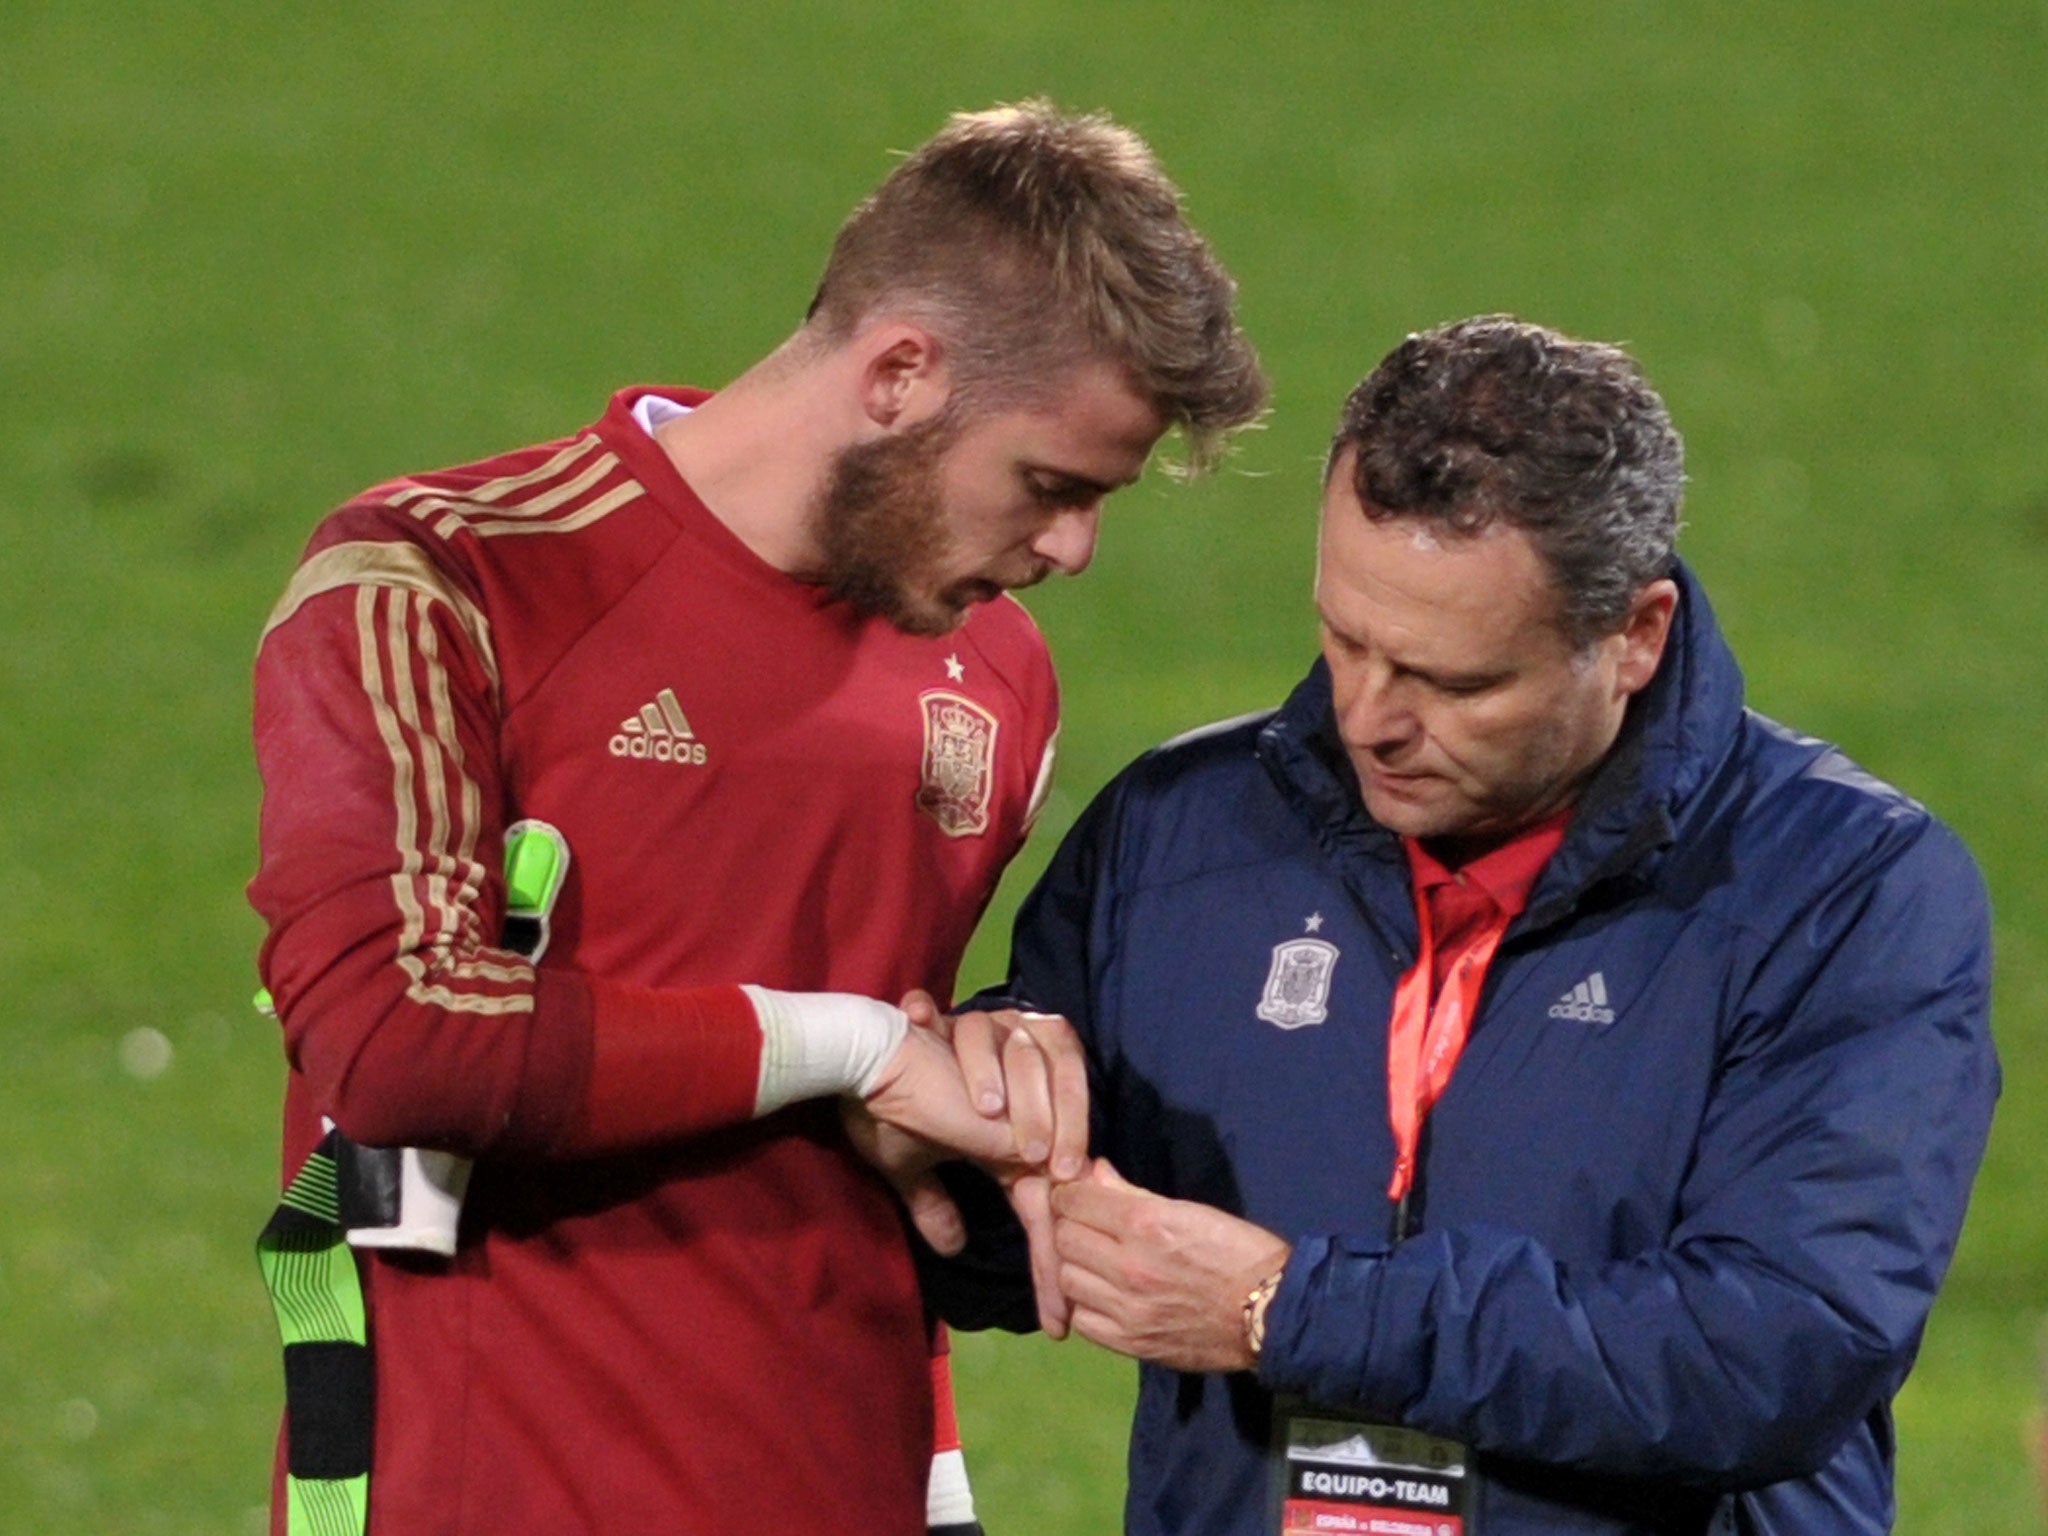 De Gea suffered a dislocated finger during Spain's win over Gibraltar